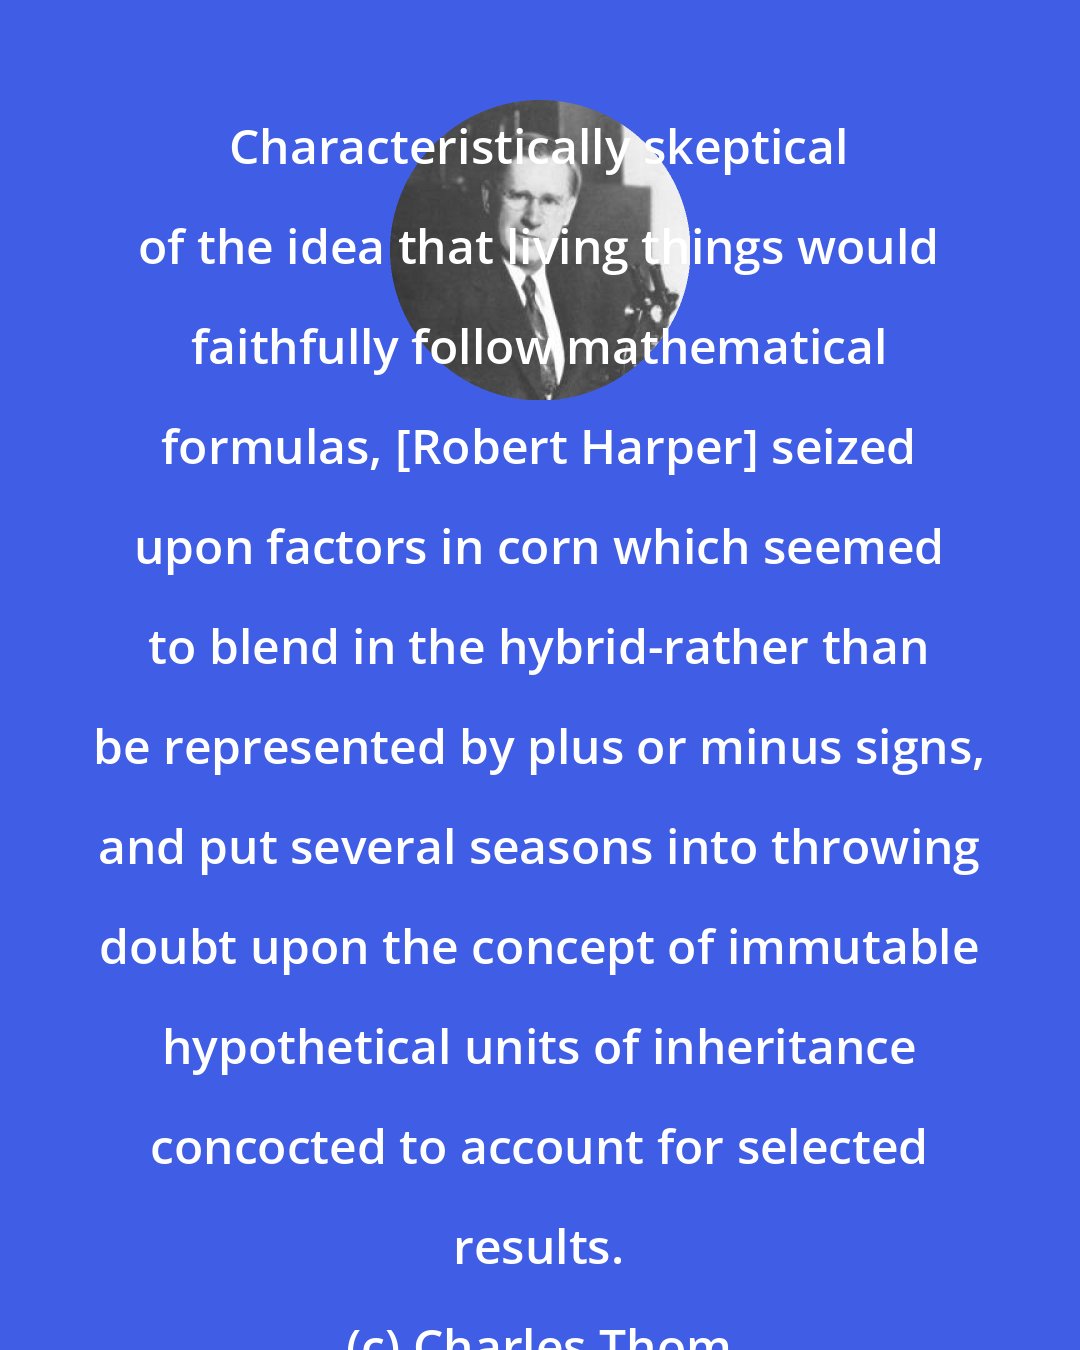 Charles Thom: Characteristically skeptical of the idea that living things would faithfully follow mathematical formulas, [Robert Harper] seized upon factors in corn which seemed to blend in the hybrid-rather than be represented by plus or minus signs, and put several seasons into throwing doubt upon the concept of immutable hypothetical units of inheritance concocted to account for selected results.